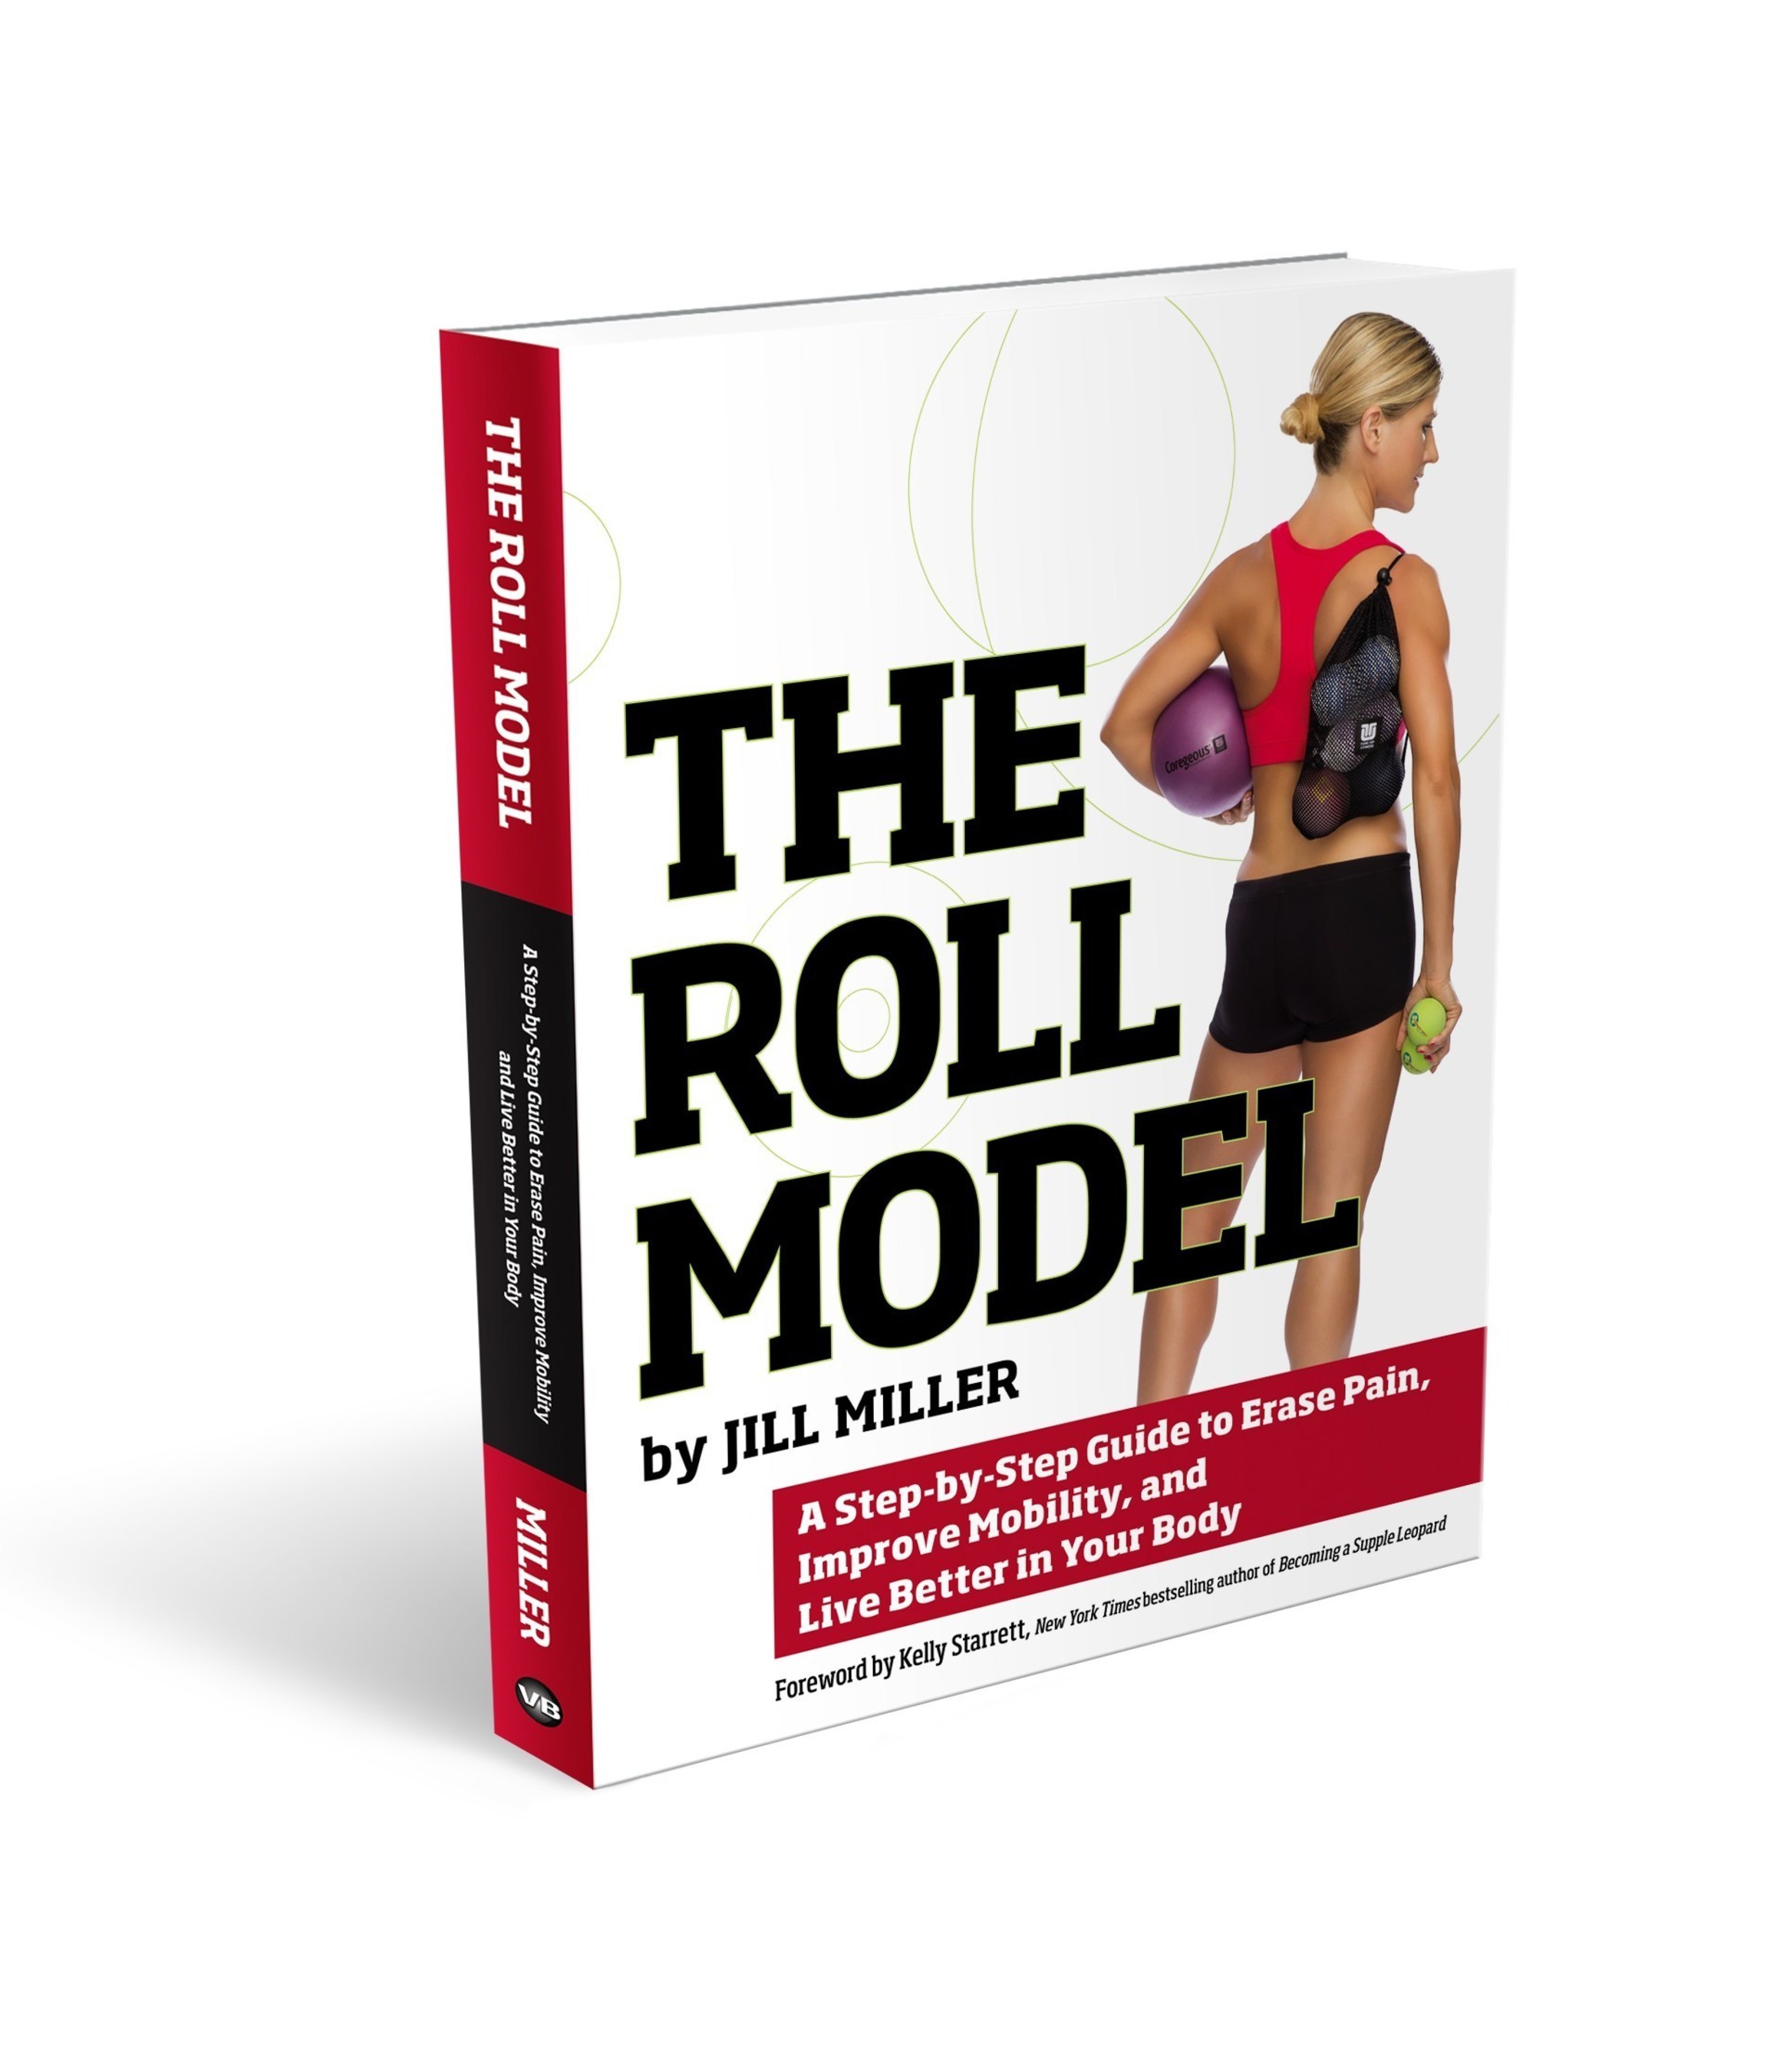 The Roll Model Debuts At Number One In Fitness On Amazon